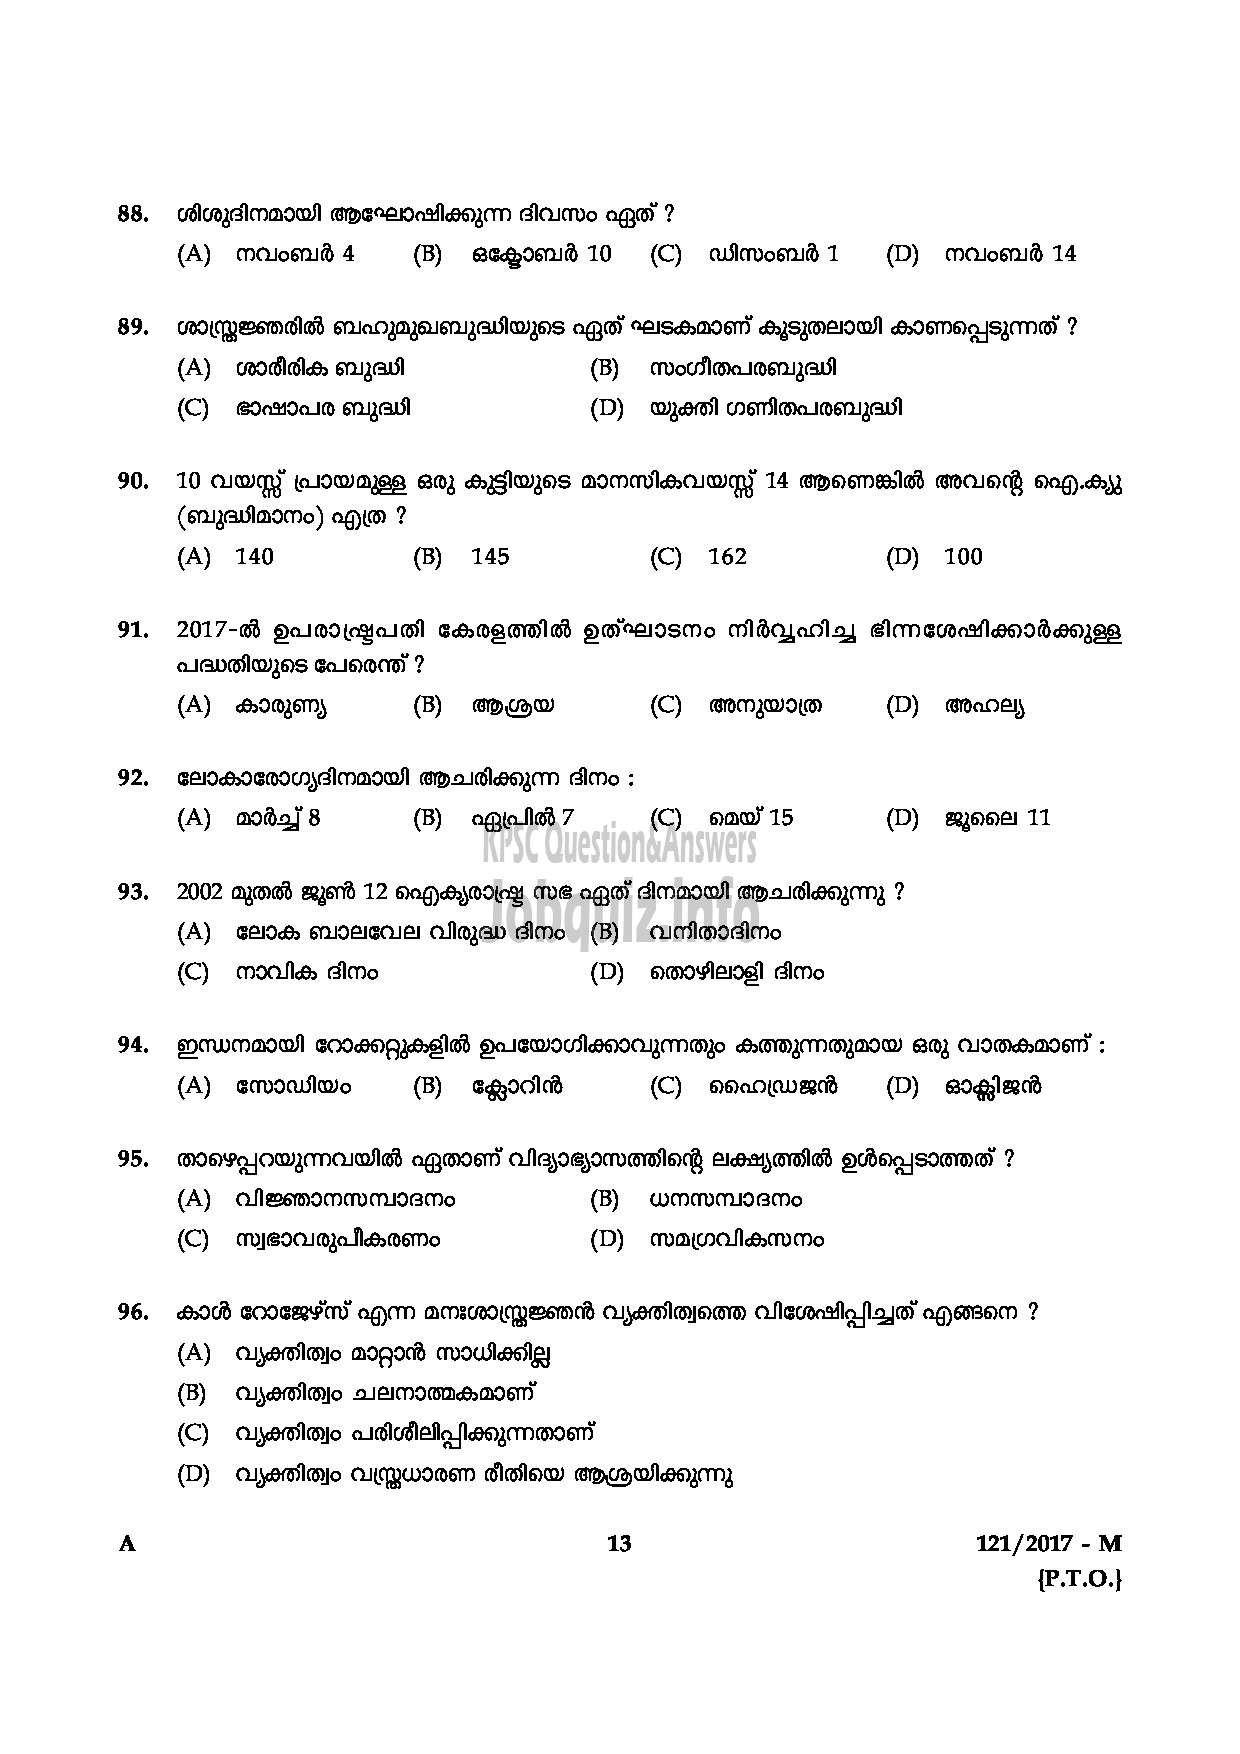 Kerala PSC Question Paper - PRE PRIMARY TEACHER EDUCATION MALAYALAM QUESTION -13